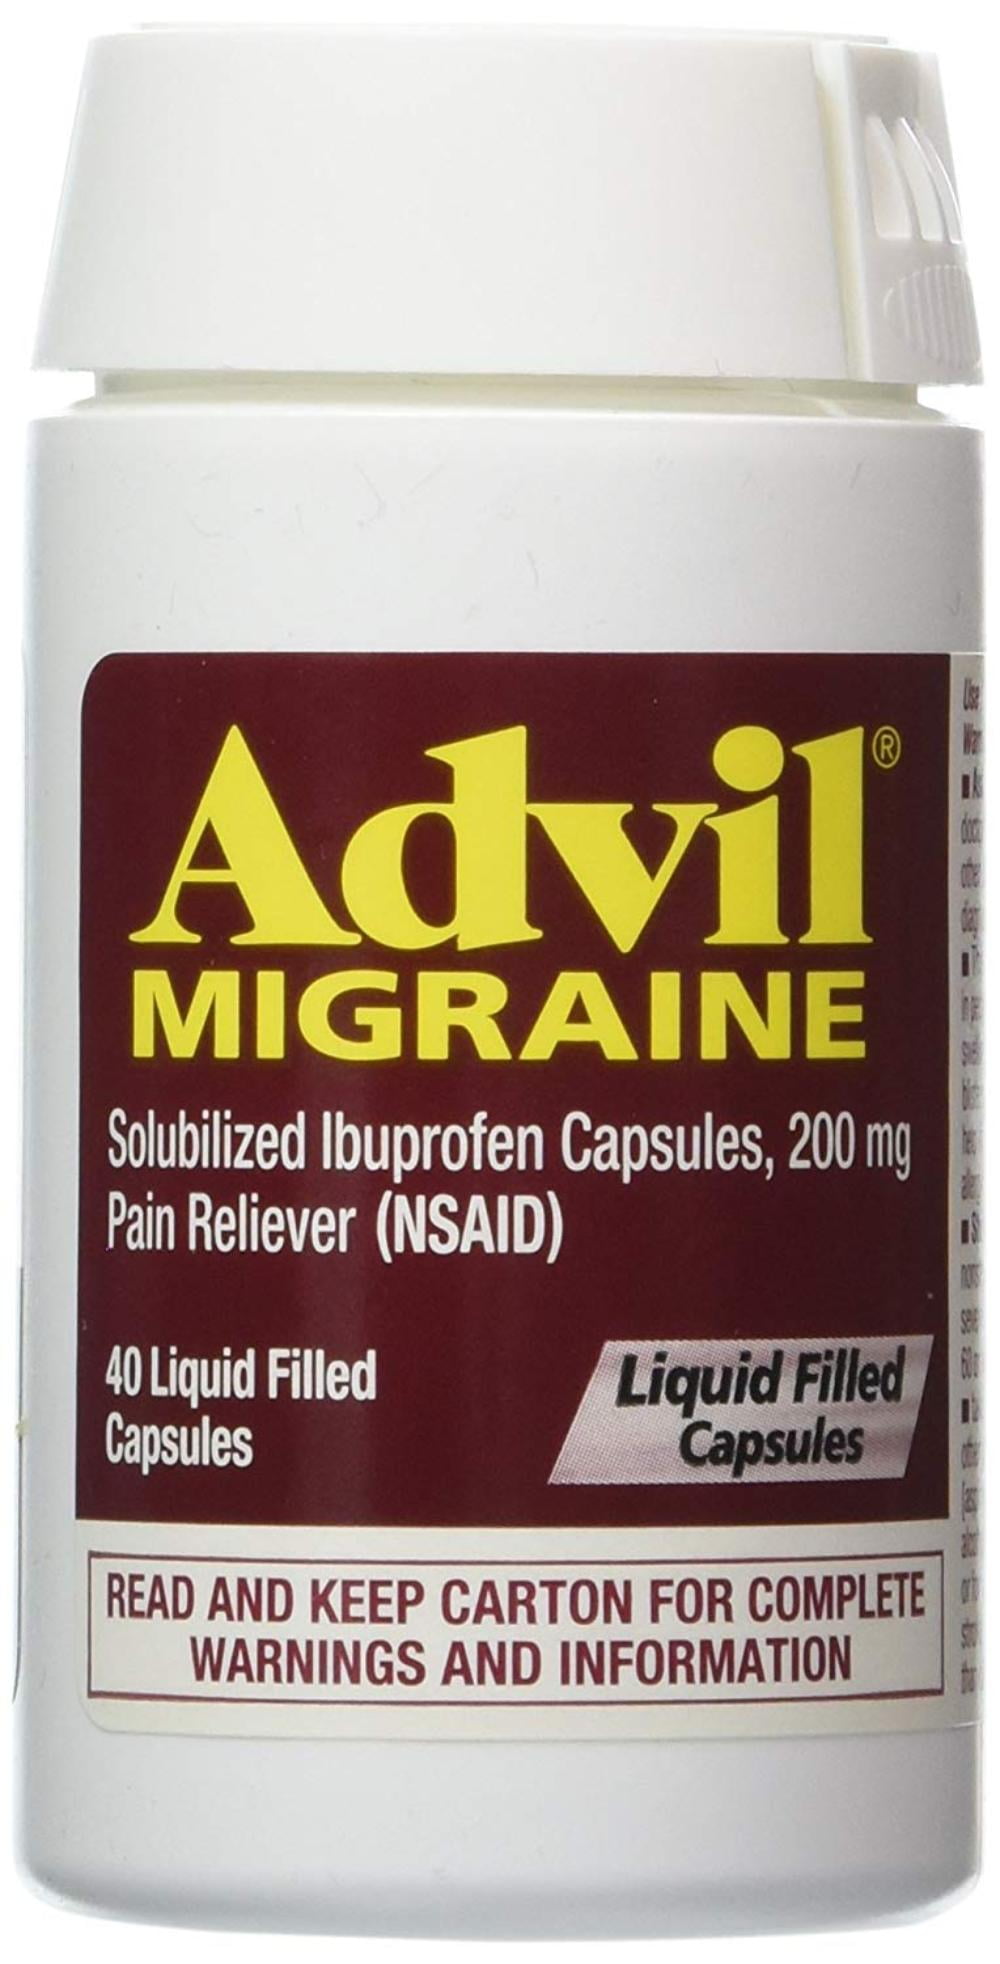 is aleve or advil better for pain